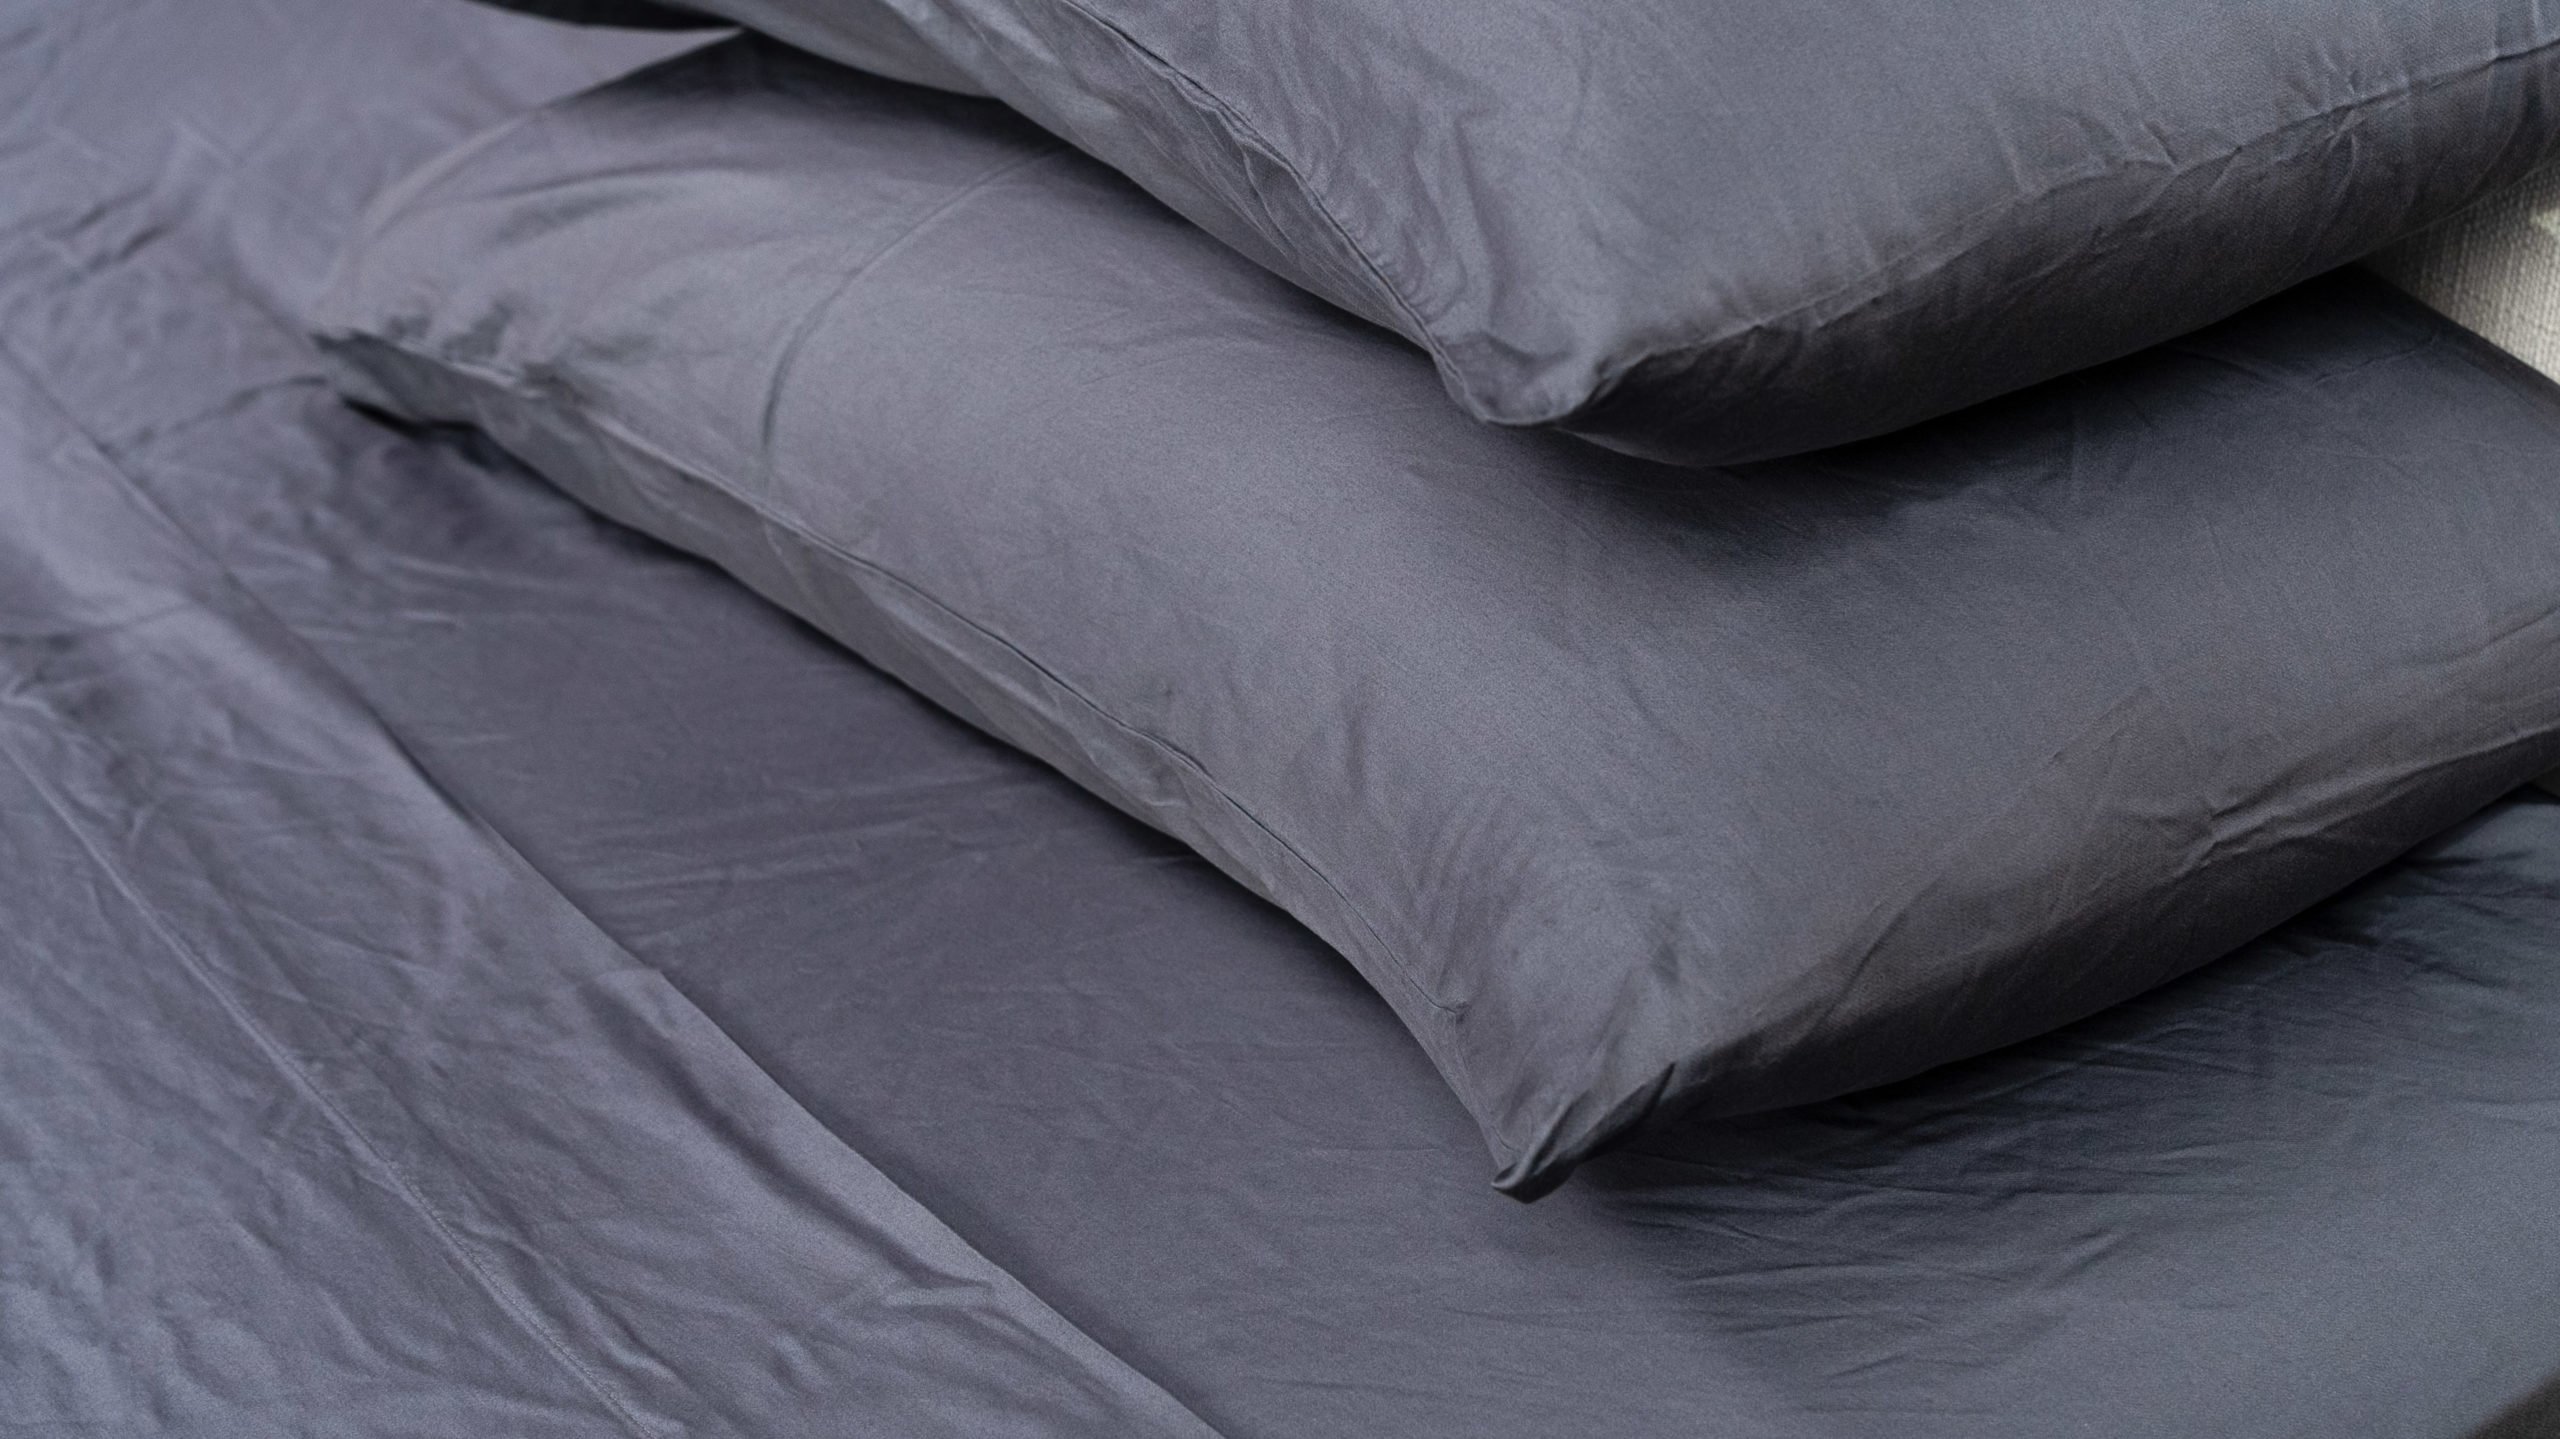 Best Material for Sheets to Stay Cool